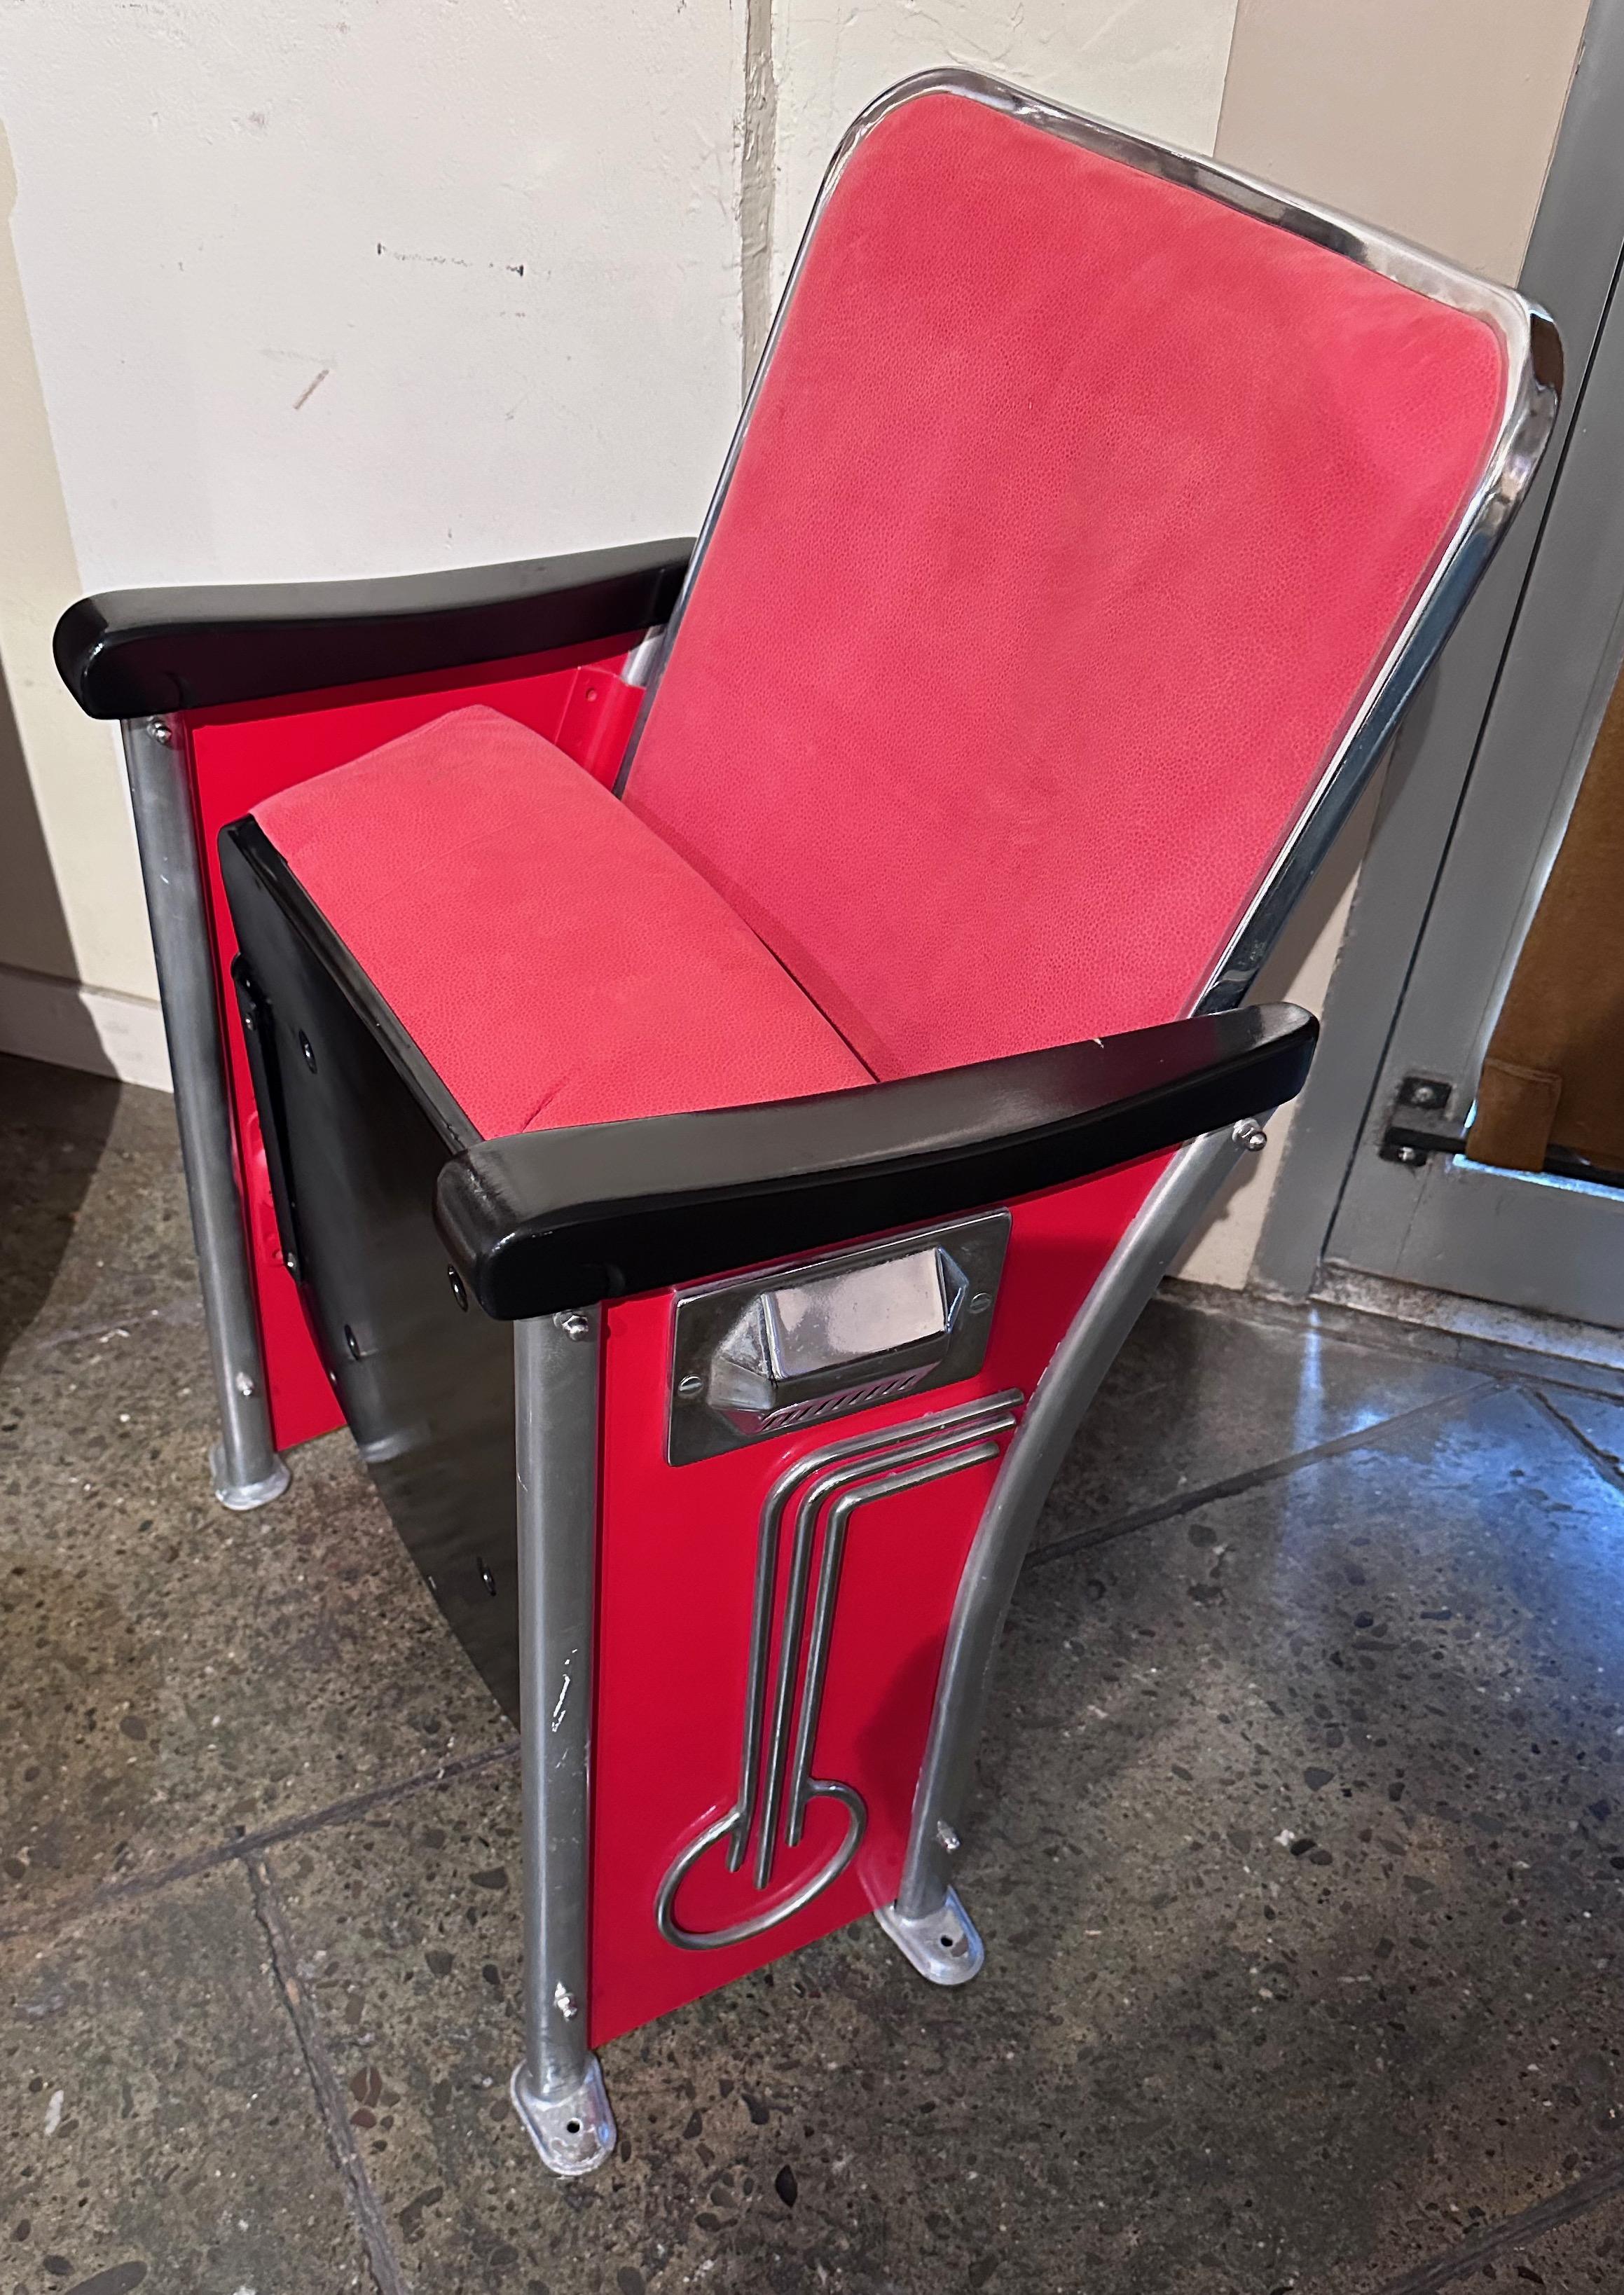 Restored Art Deco Movie Theater Seats Pair In Good Condition For Sale In Oakland, CA